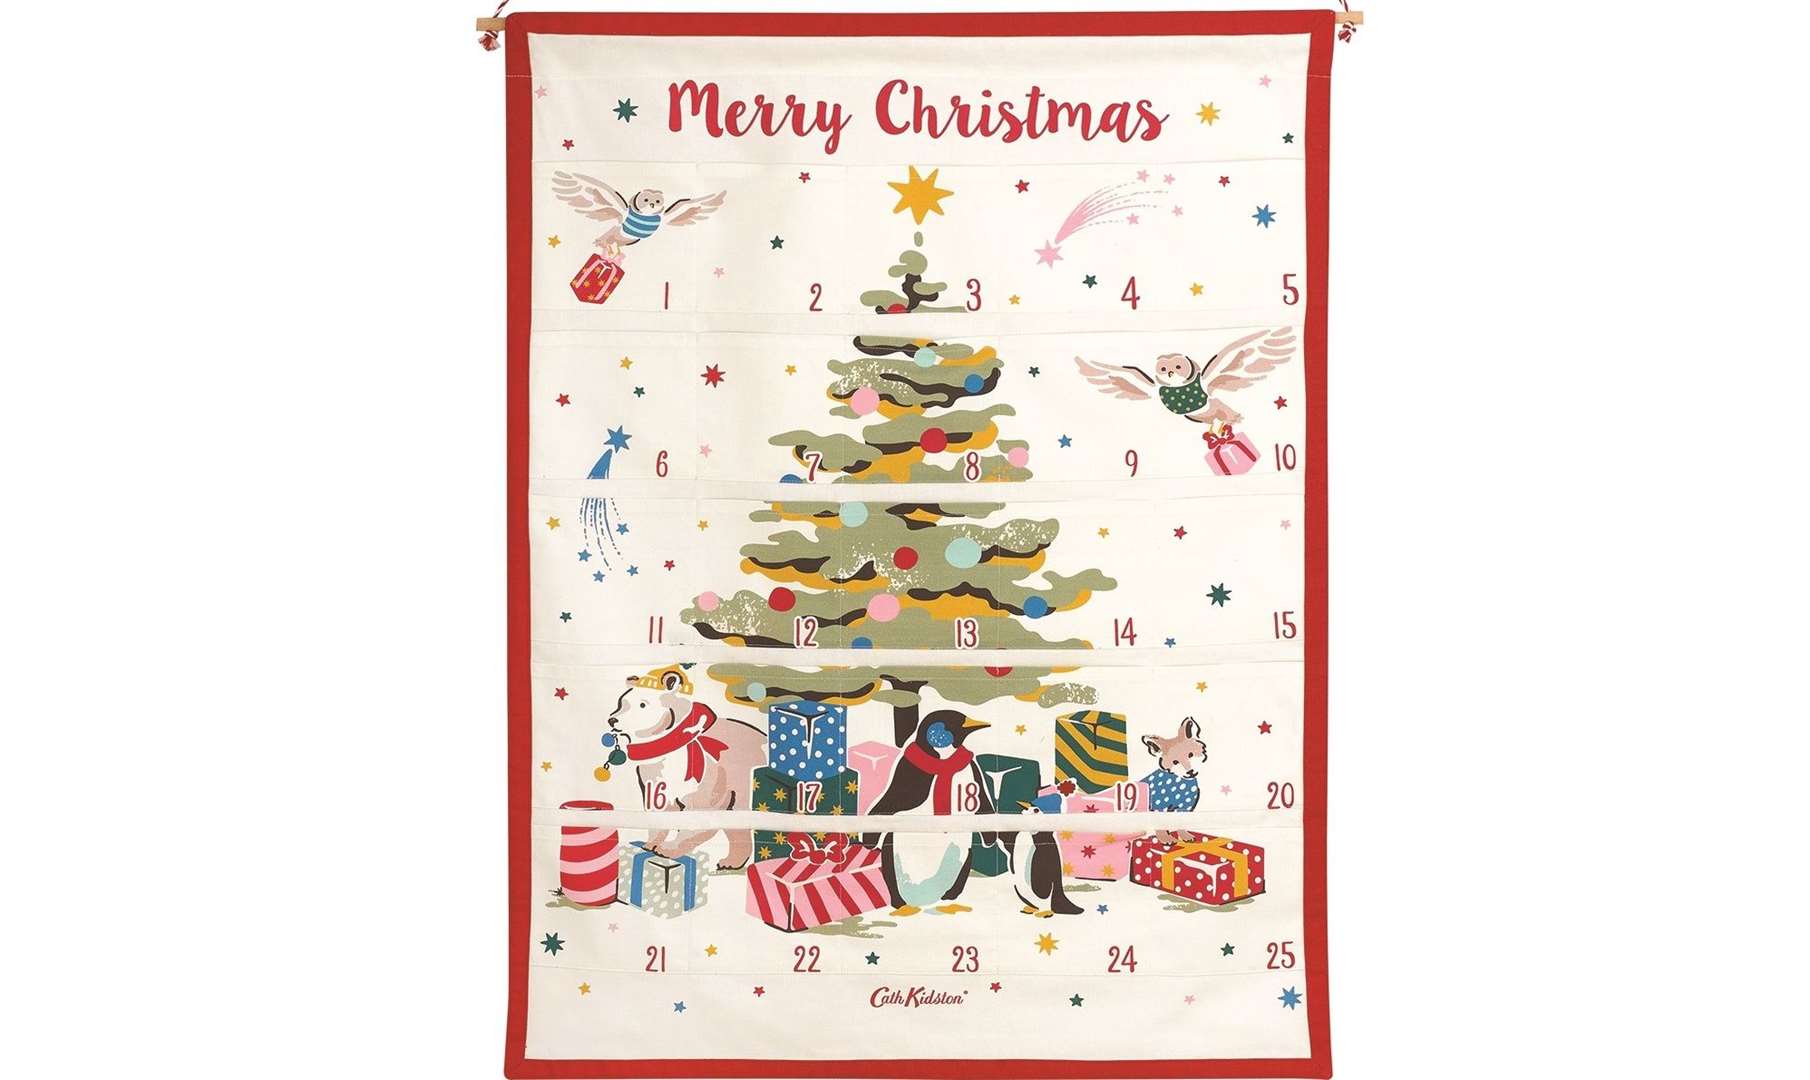 Cath Kidston fabric advent calendar will allow you to fill with your own choice of treats